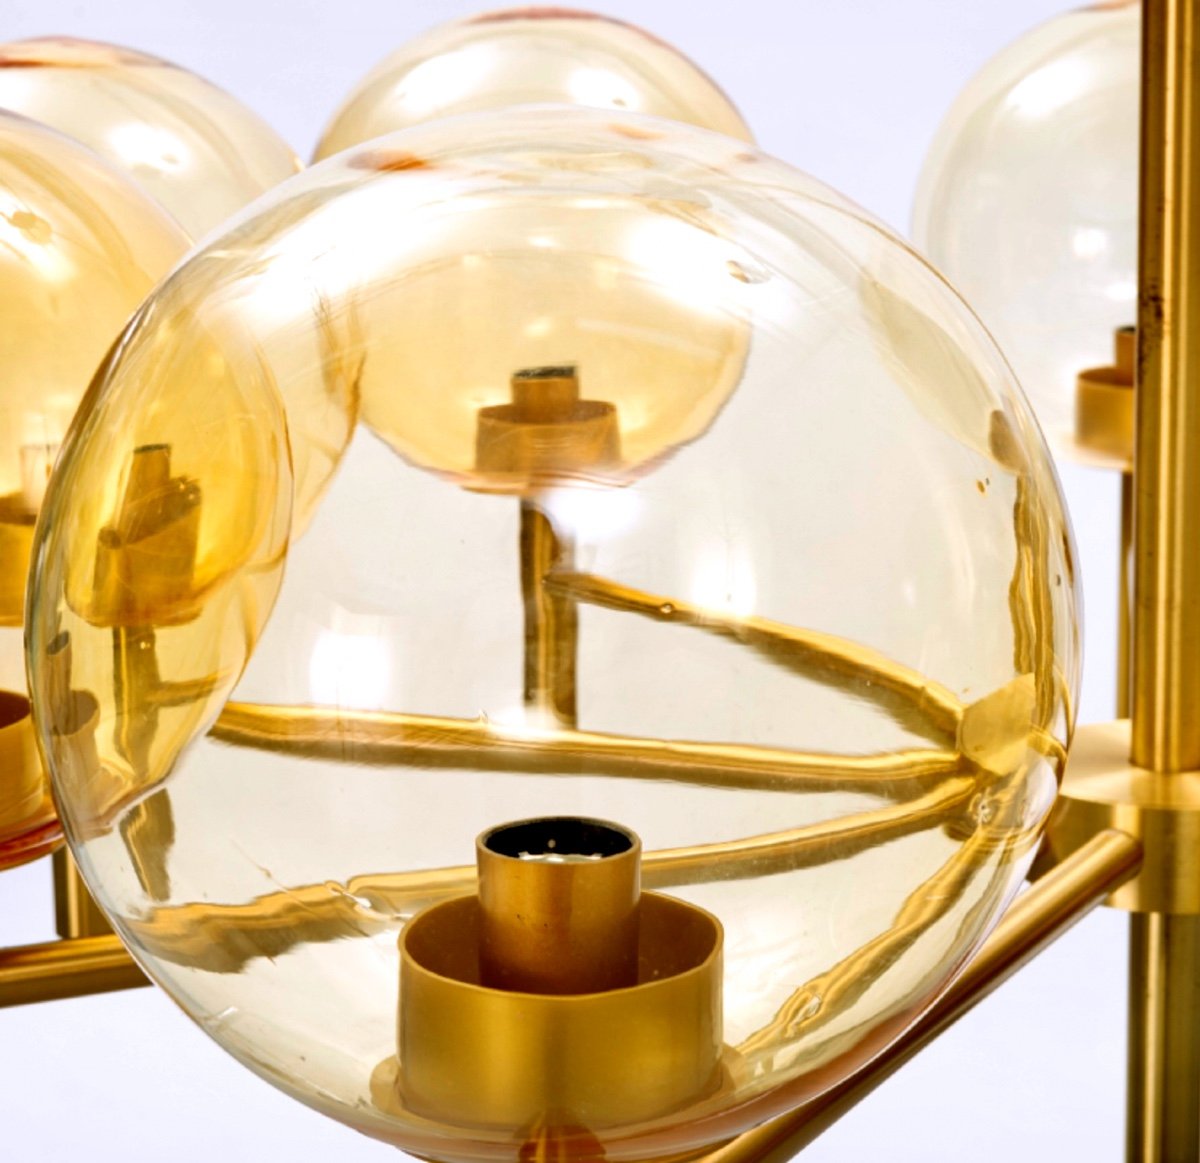 Large Luxus Chandelier With 9 Lights In Golden Brass And Amber Glass Globes, Sweden 1970s/80s-photo-1